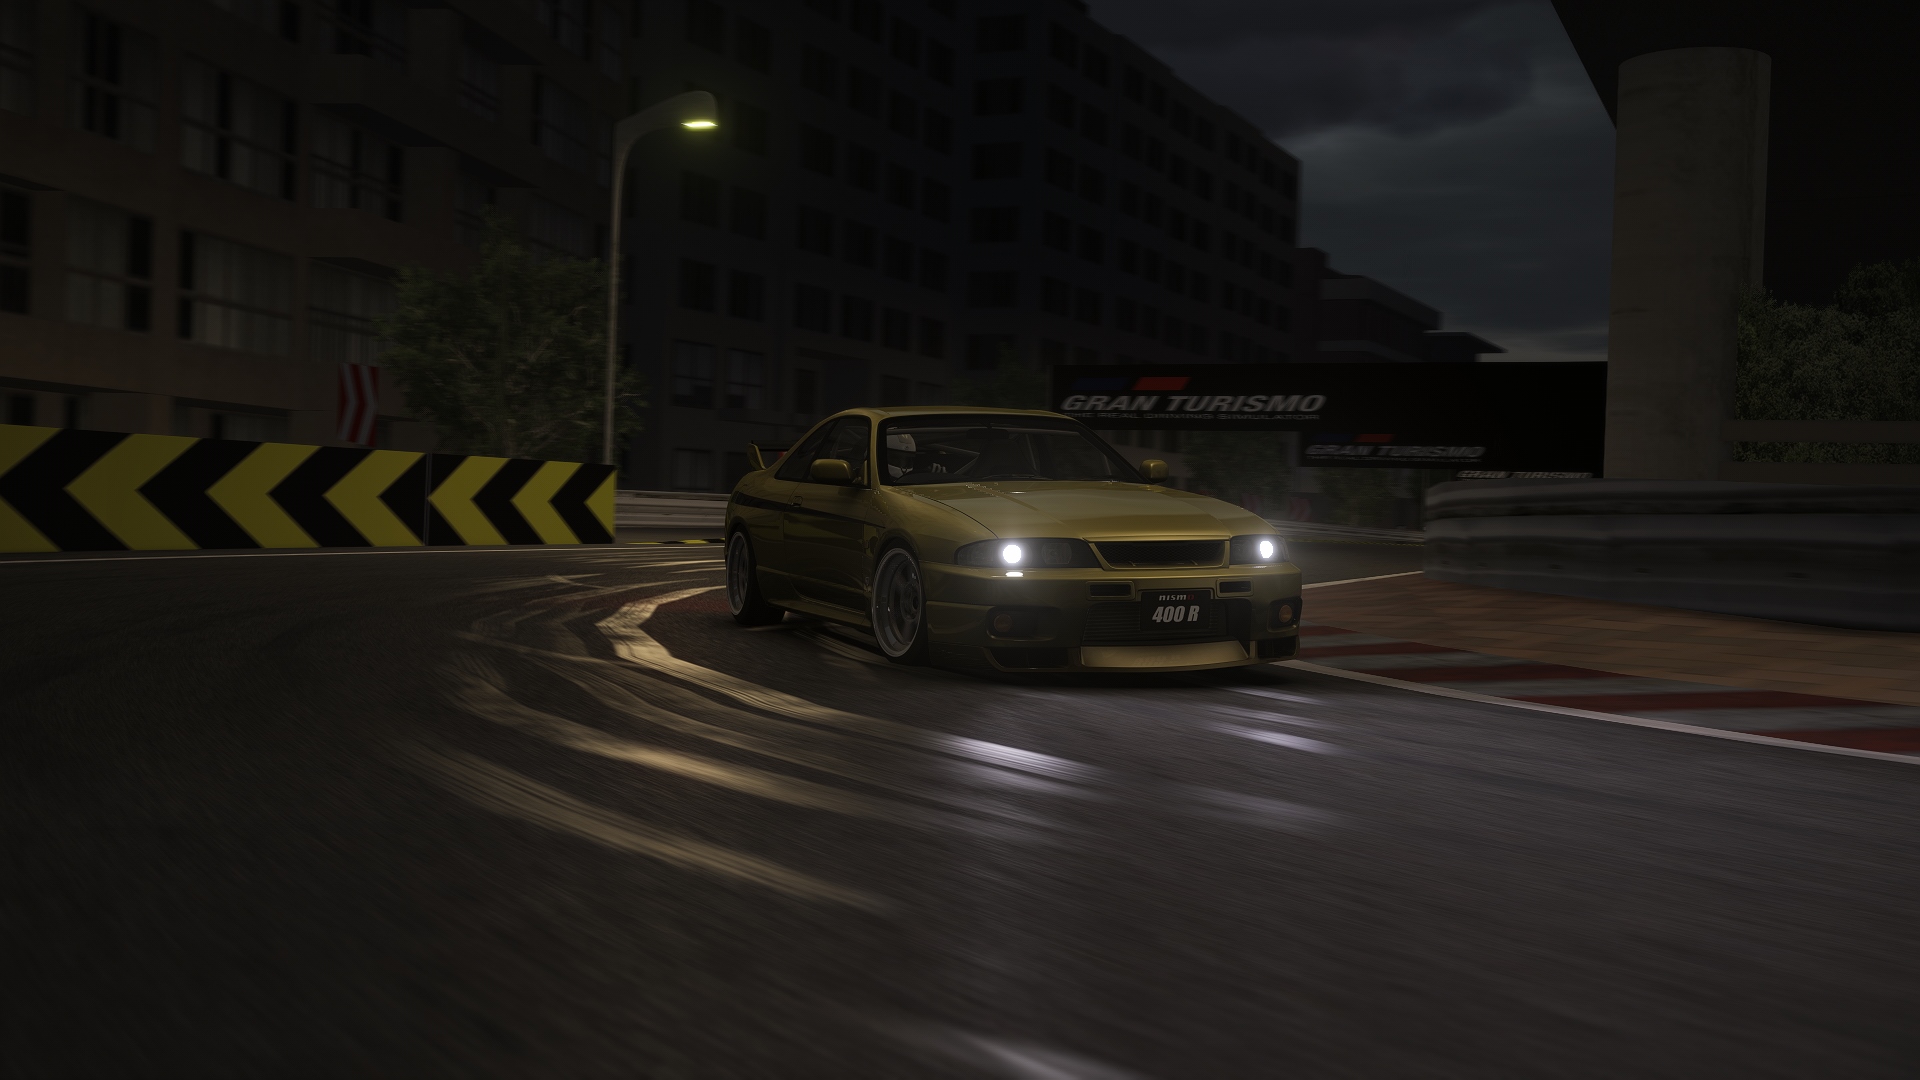 Screenshot_sts_r33_gtr_s3_n1_tuned_400r_special_stage_route_5_1-6-121-2-0-6.jpg